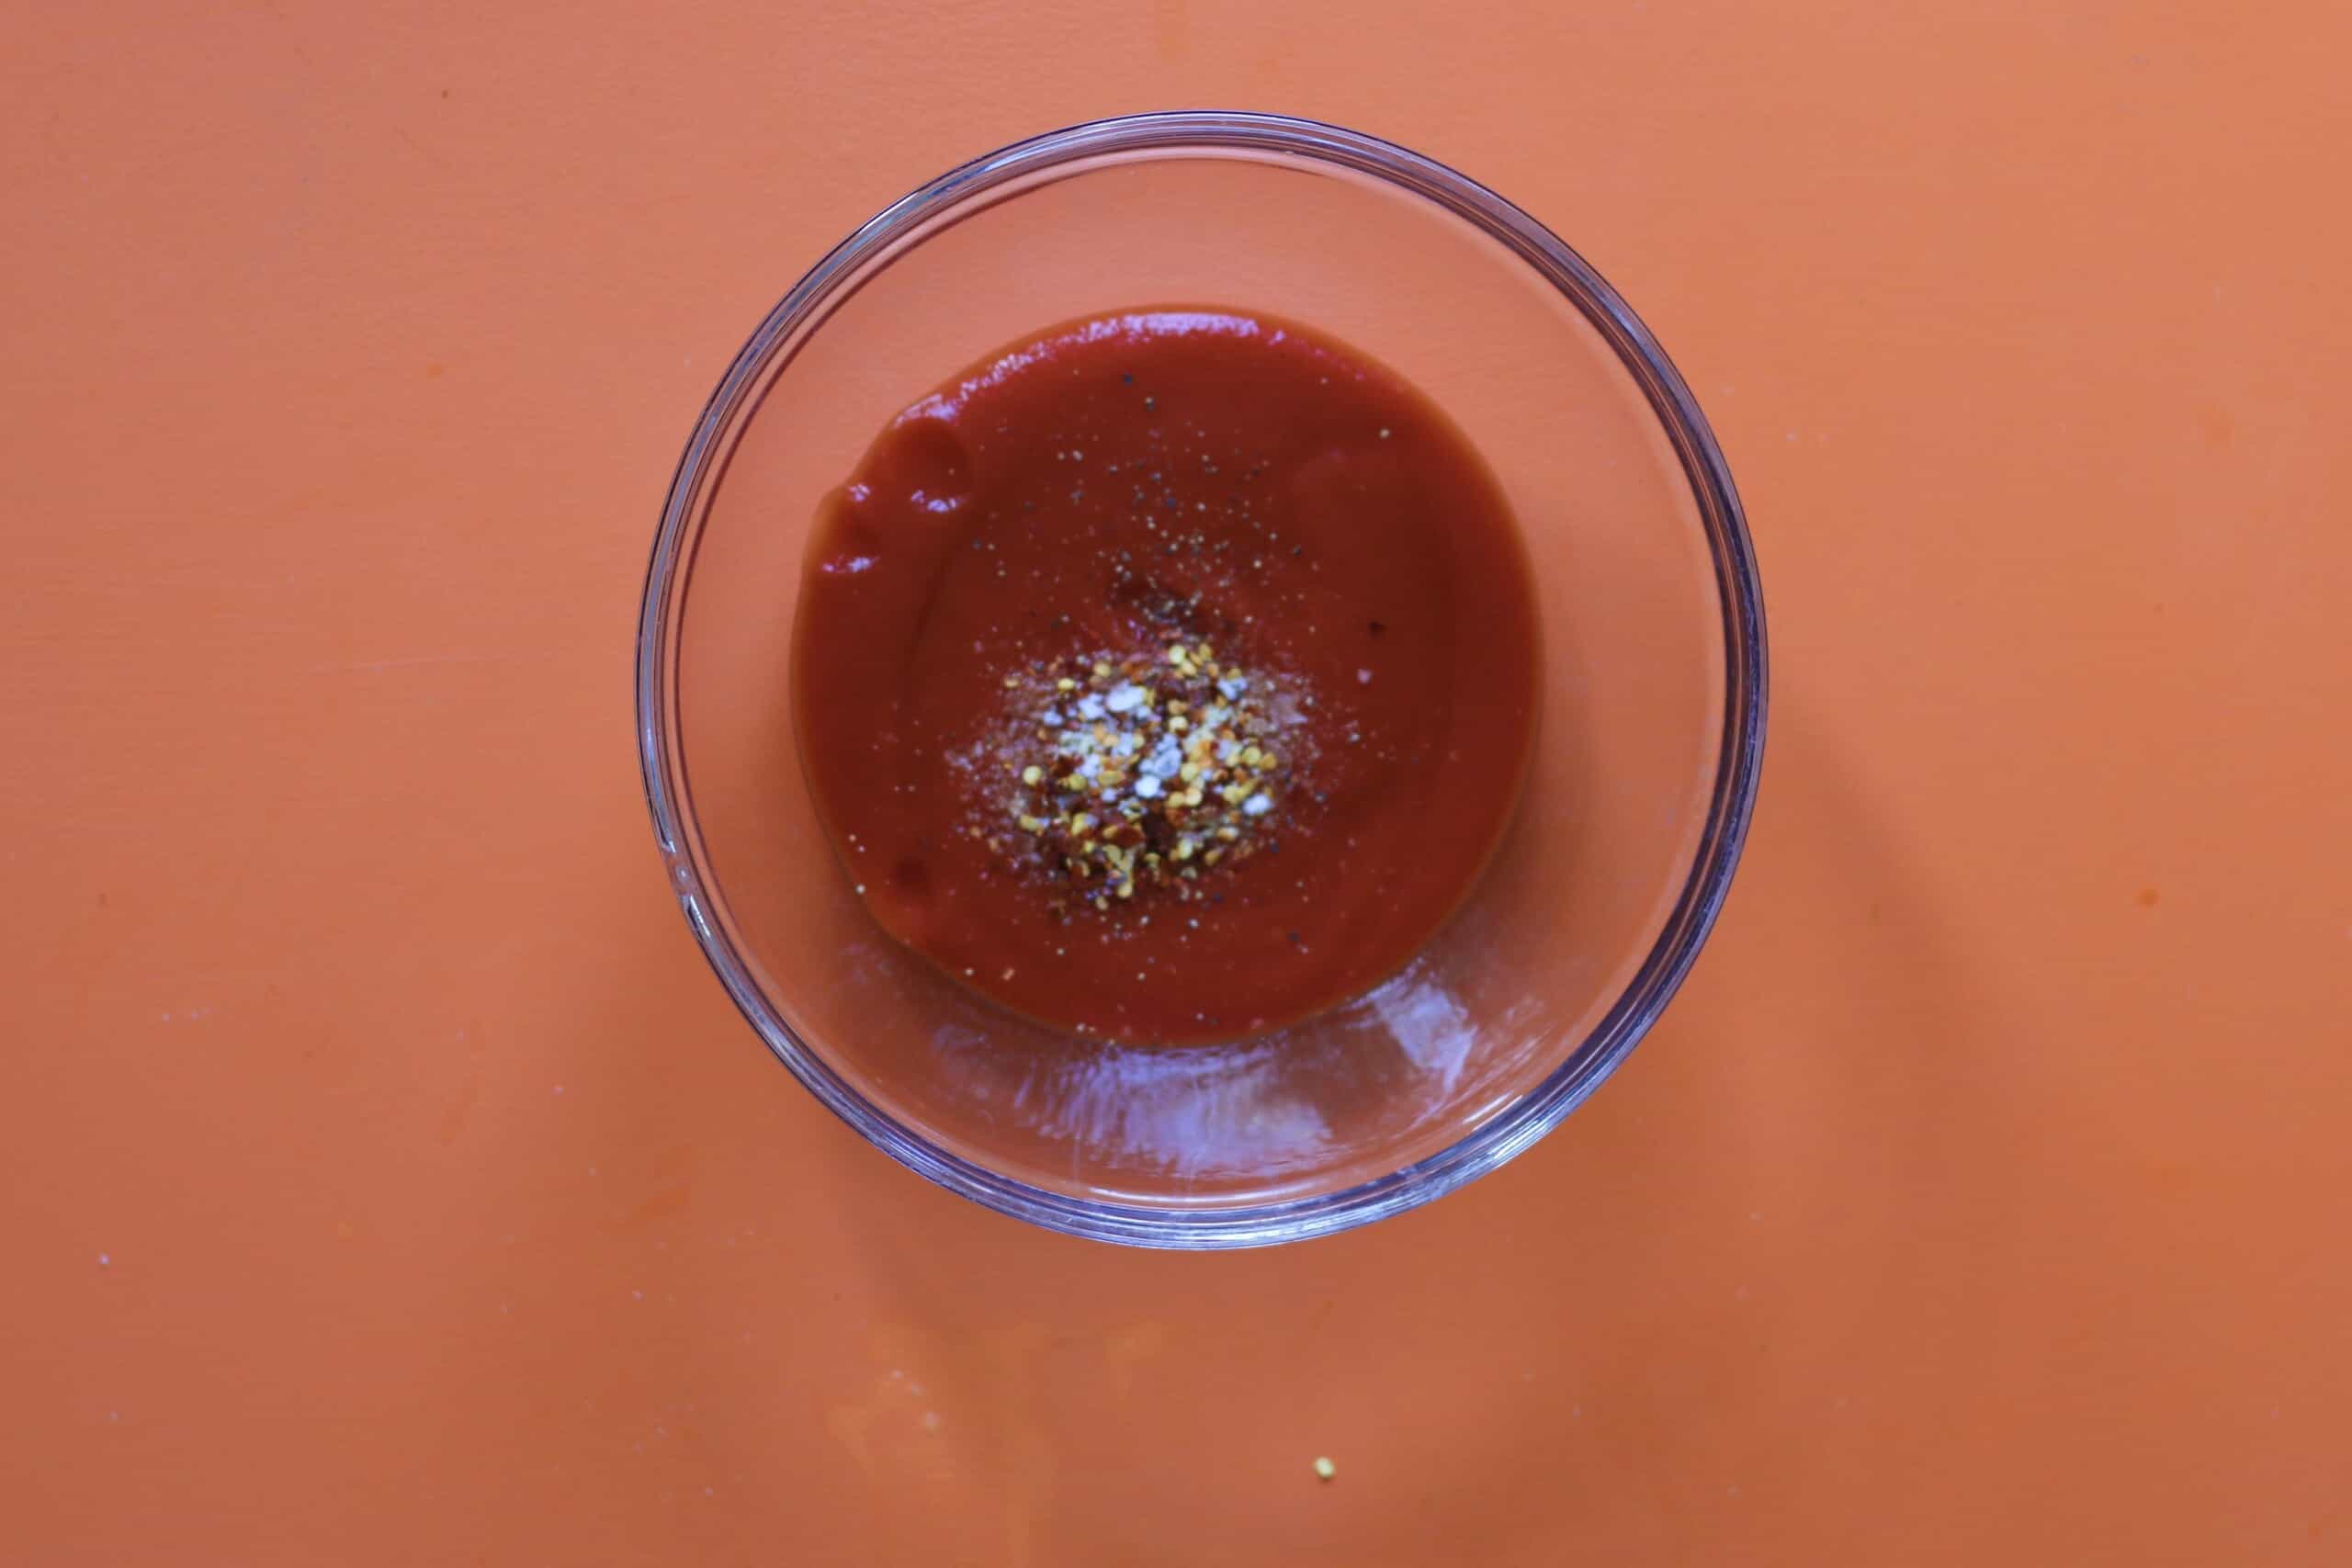 Passata with herbs and seasoning in a glass bowl on an orange background.